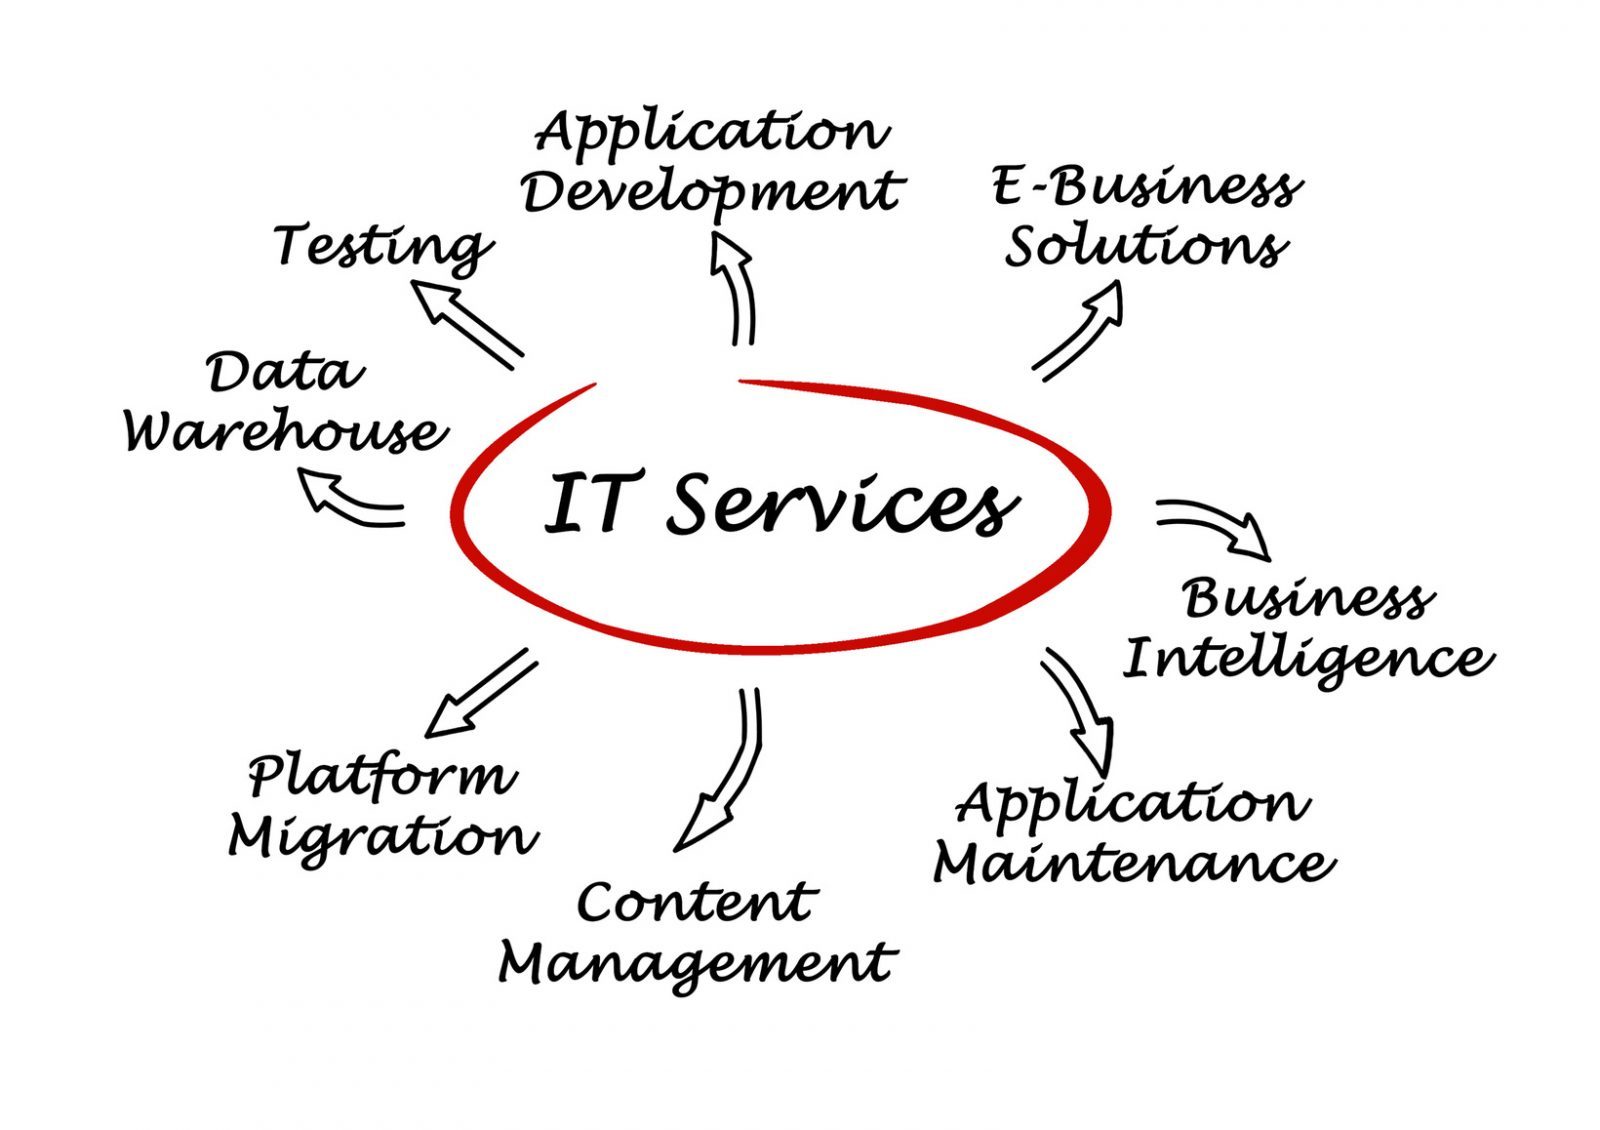 outsourced it services